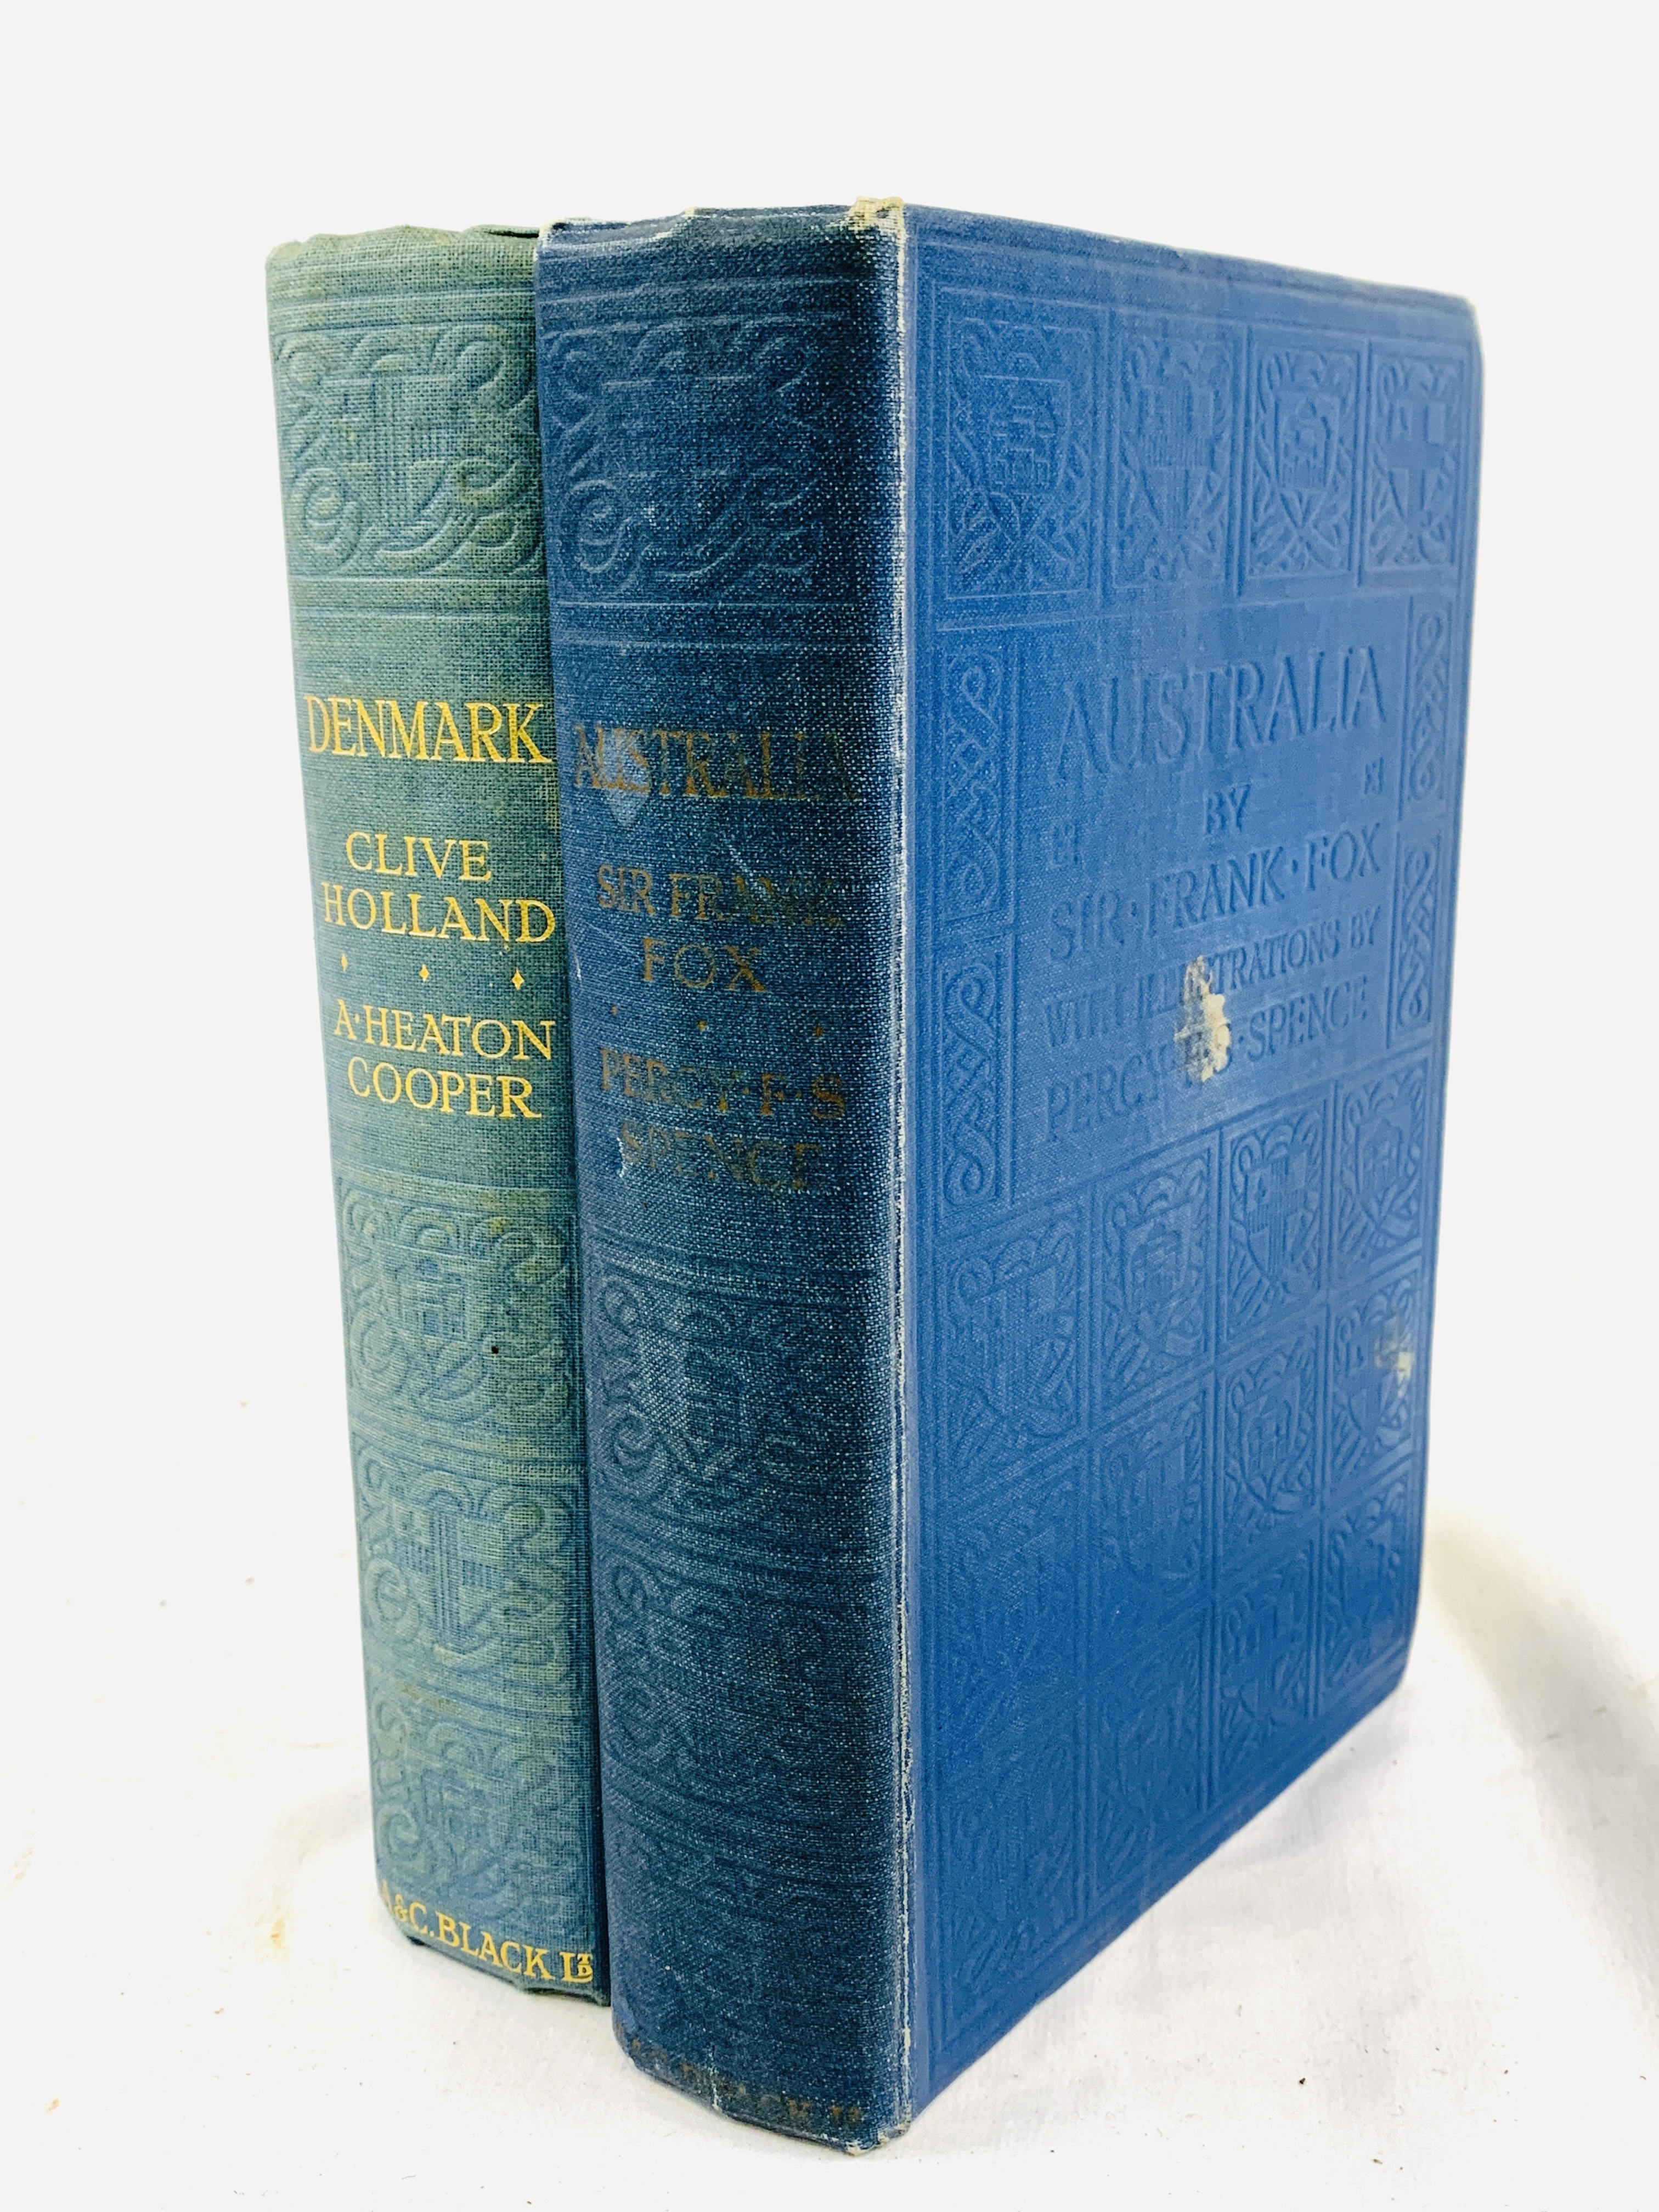 A & C Black, coloured plate books on Denmark and Australia, 1927 and 1928.